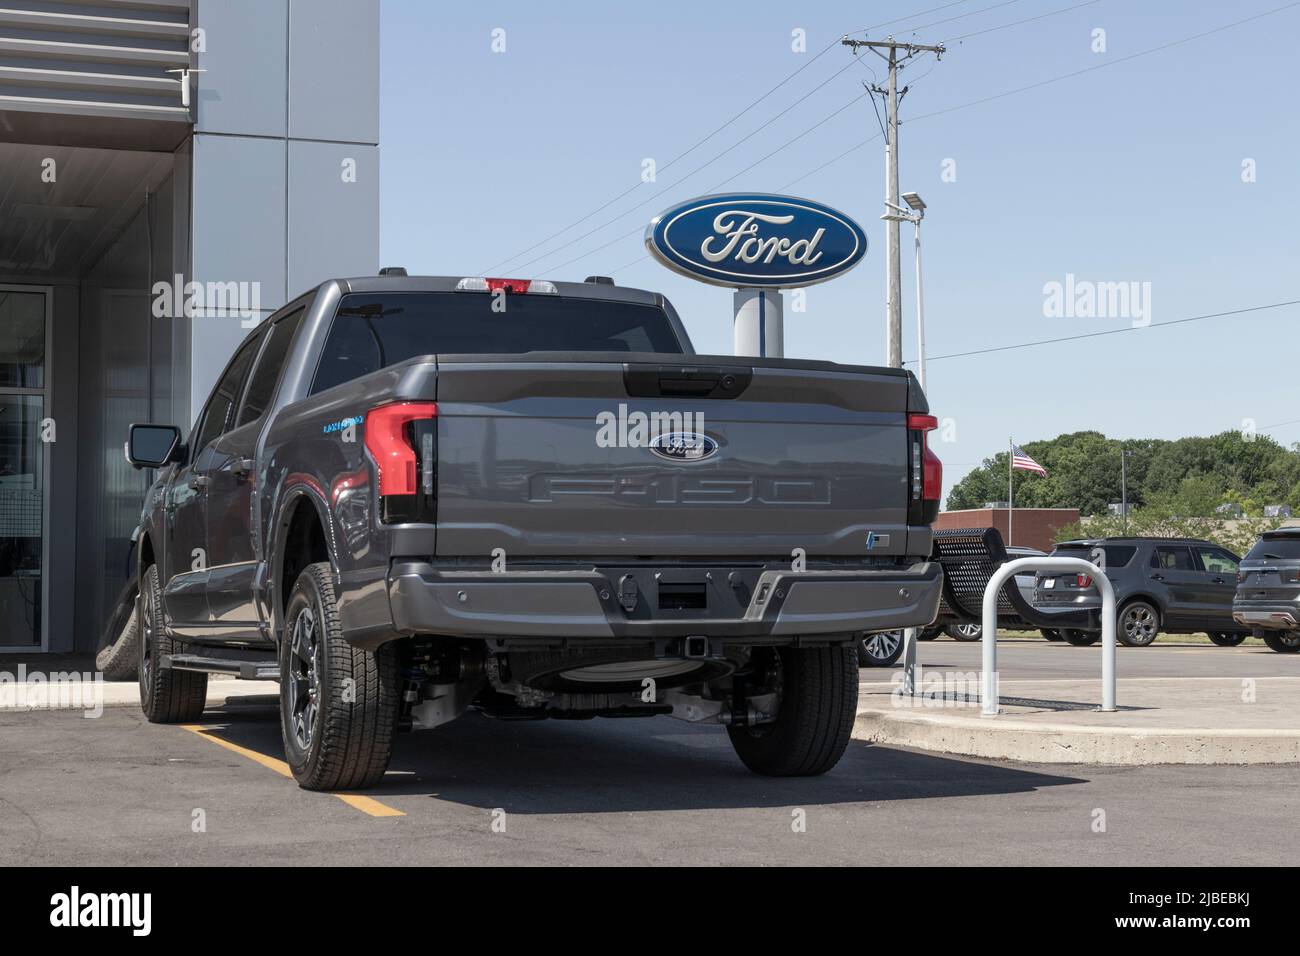 Marion - Circa June 2022: Ford F-150 Lightning display. Ford offers the F150 Lightning all-electric truck in Pro, XLT, Lariat, and Platinum models. Stock Photo